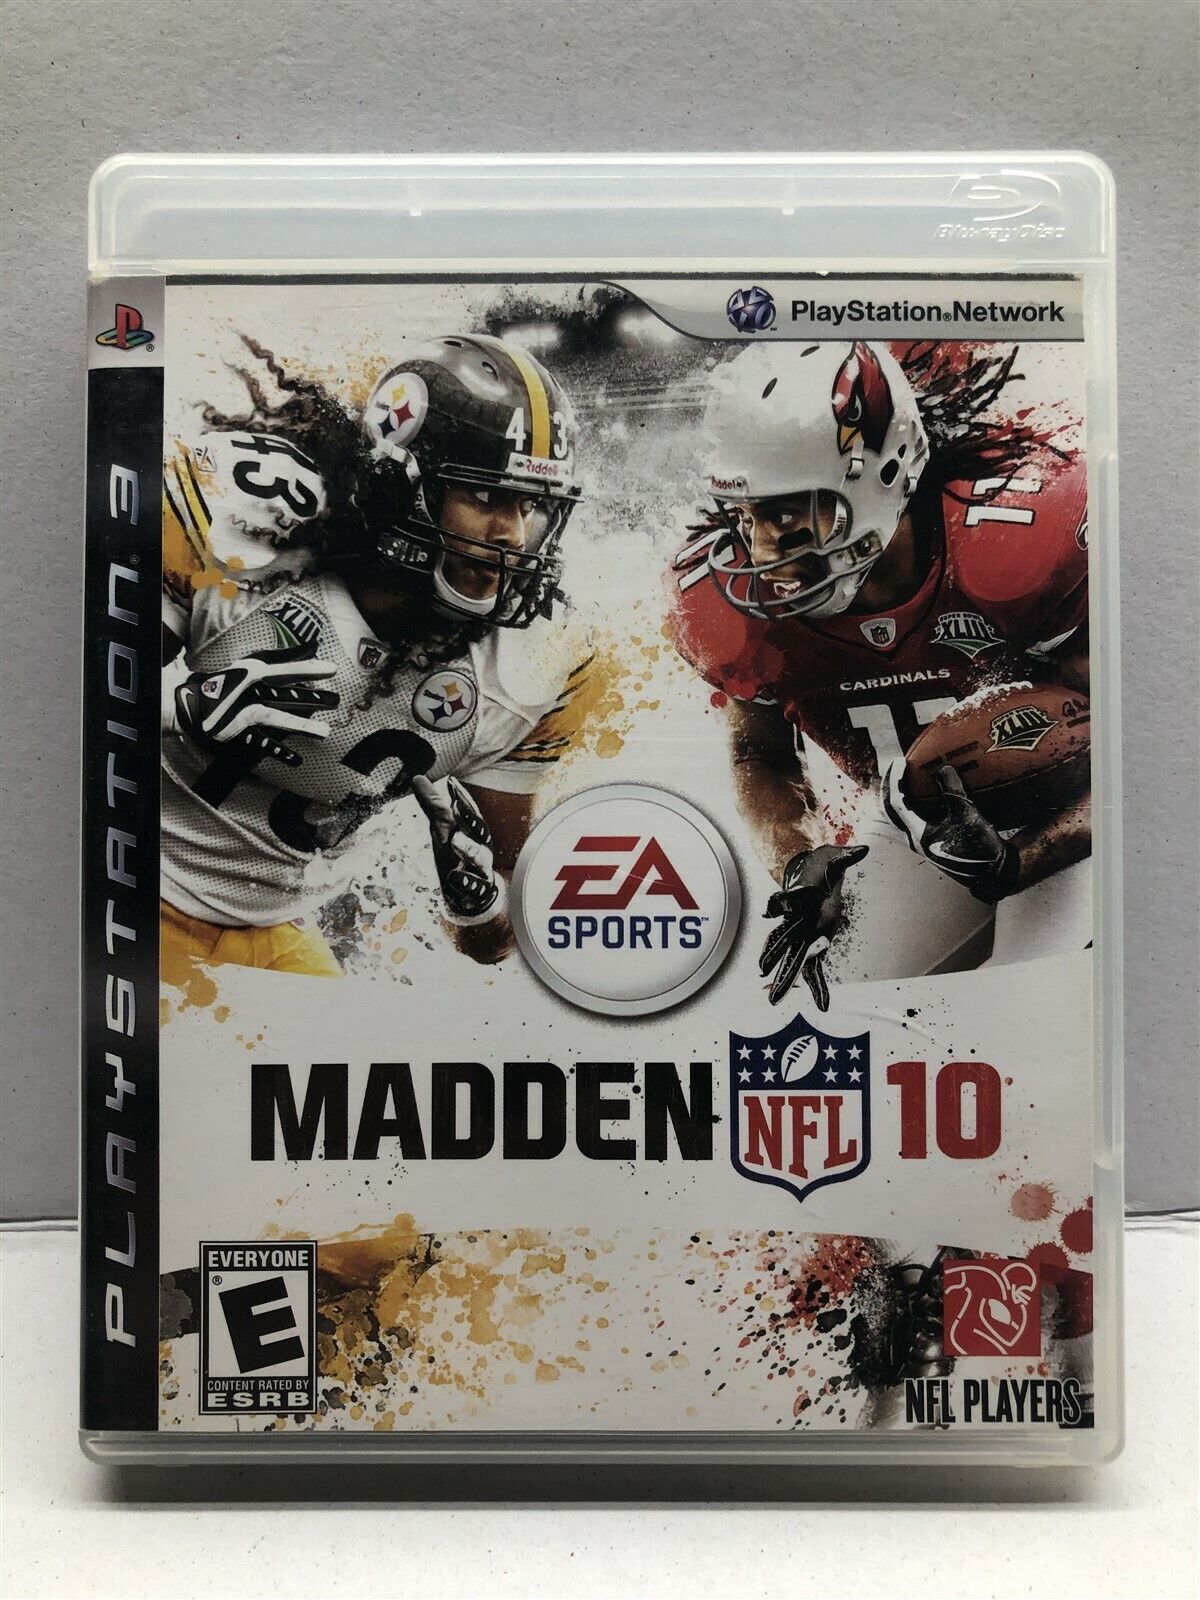 Lot echtgenoot Haarvaten Madden NFL 10 - PlayStation 3 PS3 Game - Complete w/ Manual - Tested Free  Ship 14633190236 | eBay